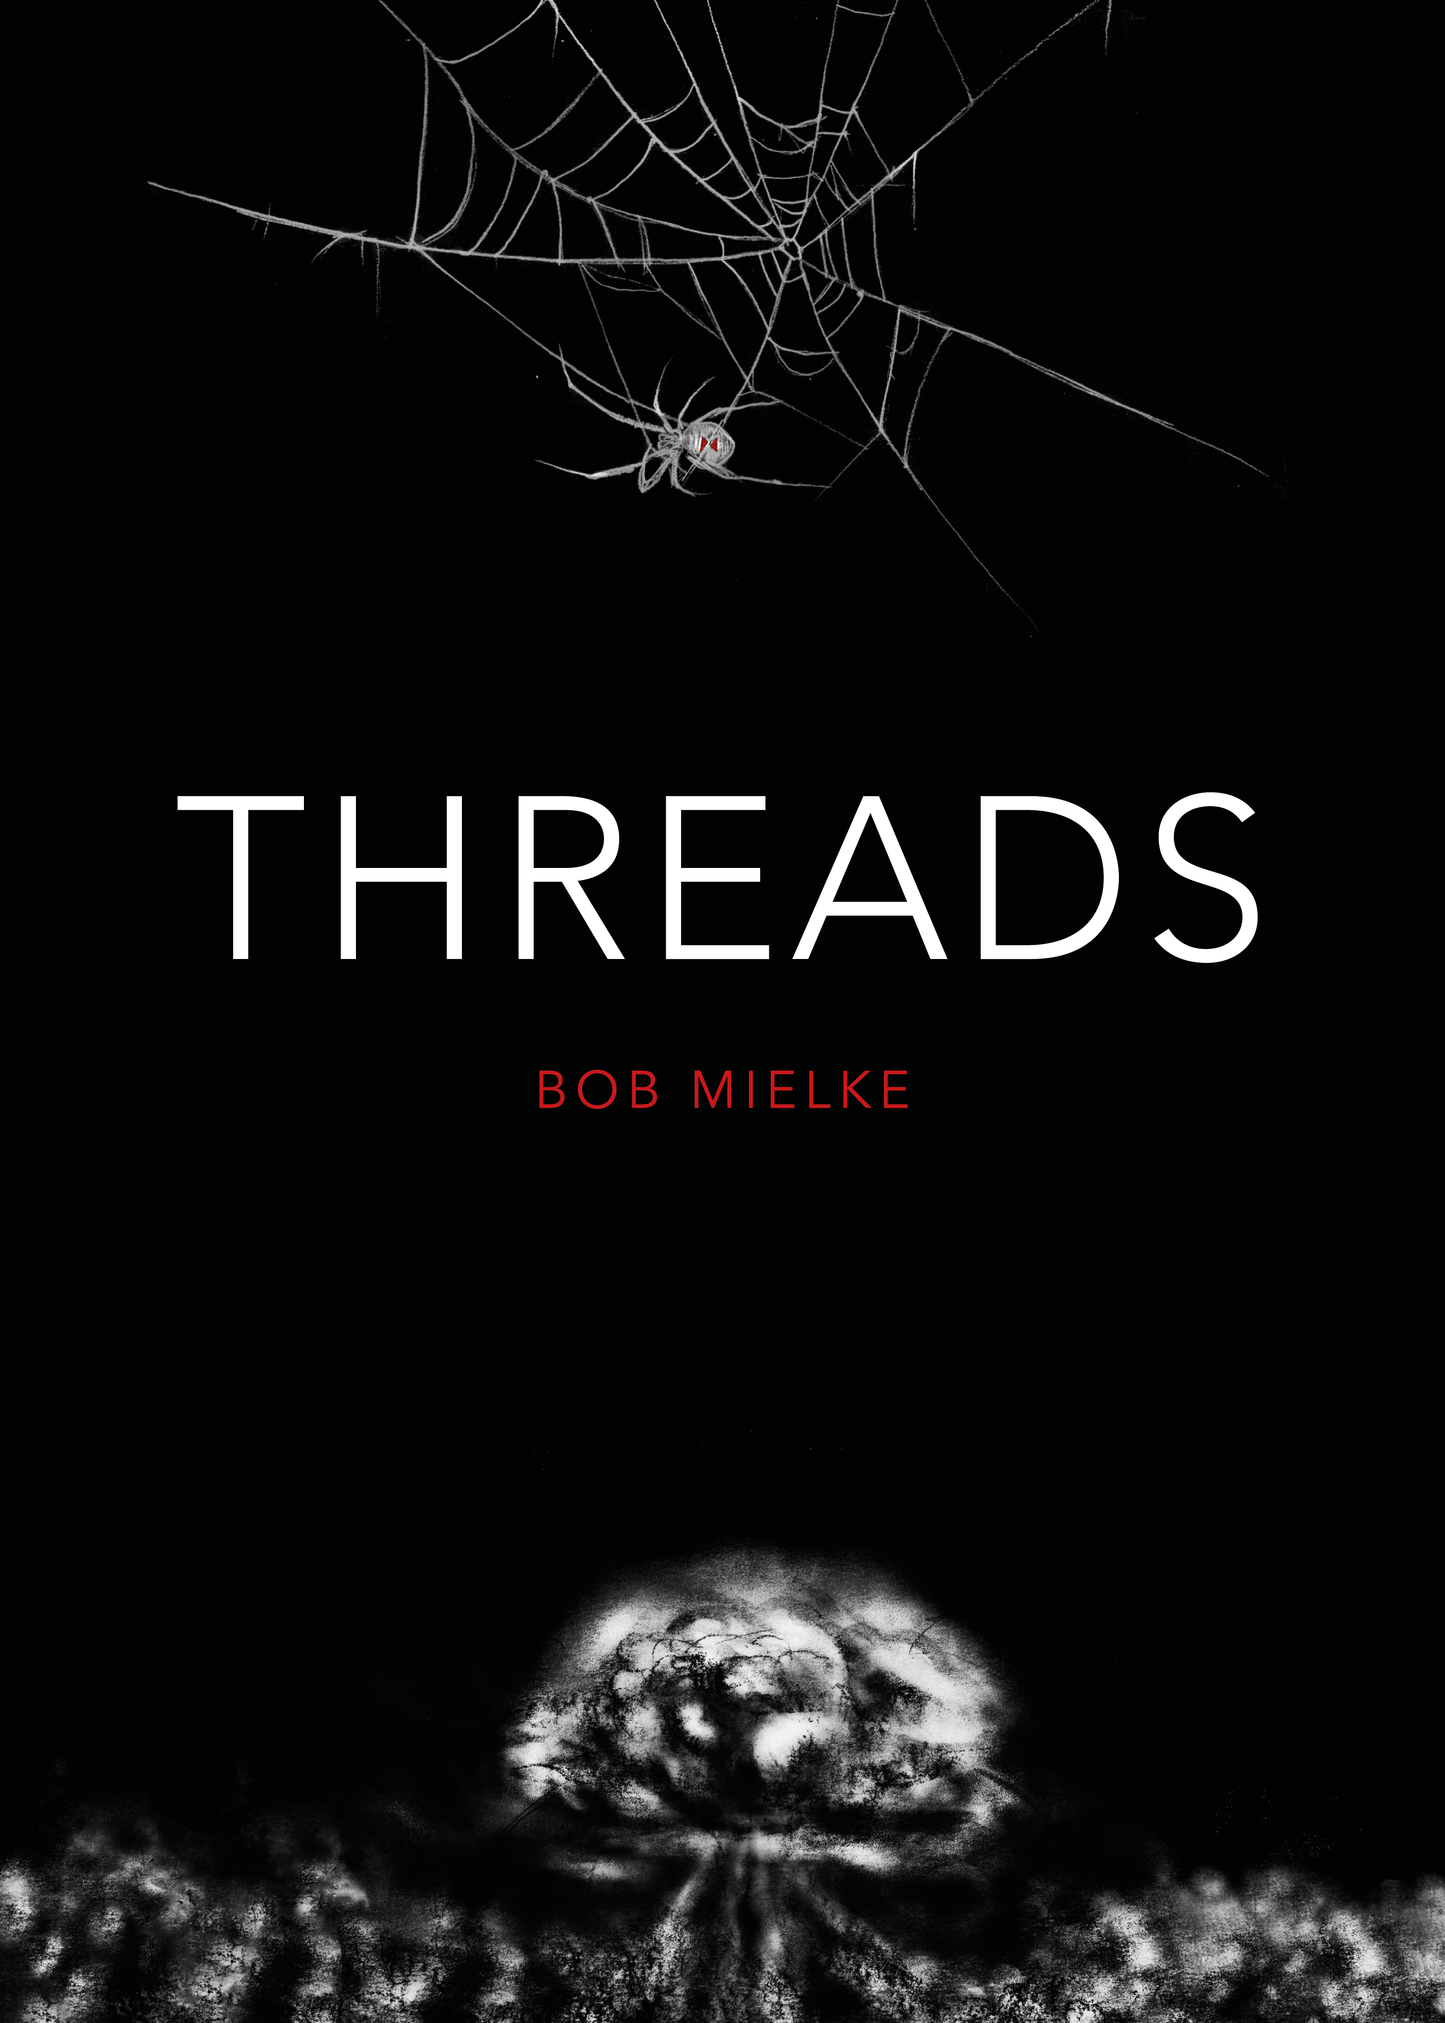 Book cover art for DieDieBooks' Threads based on the 1984 movie